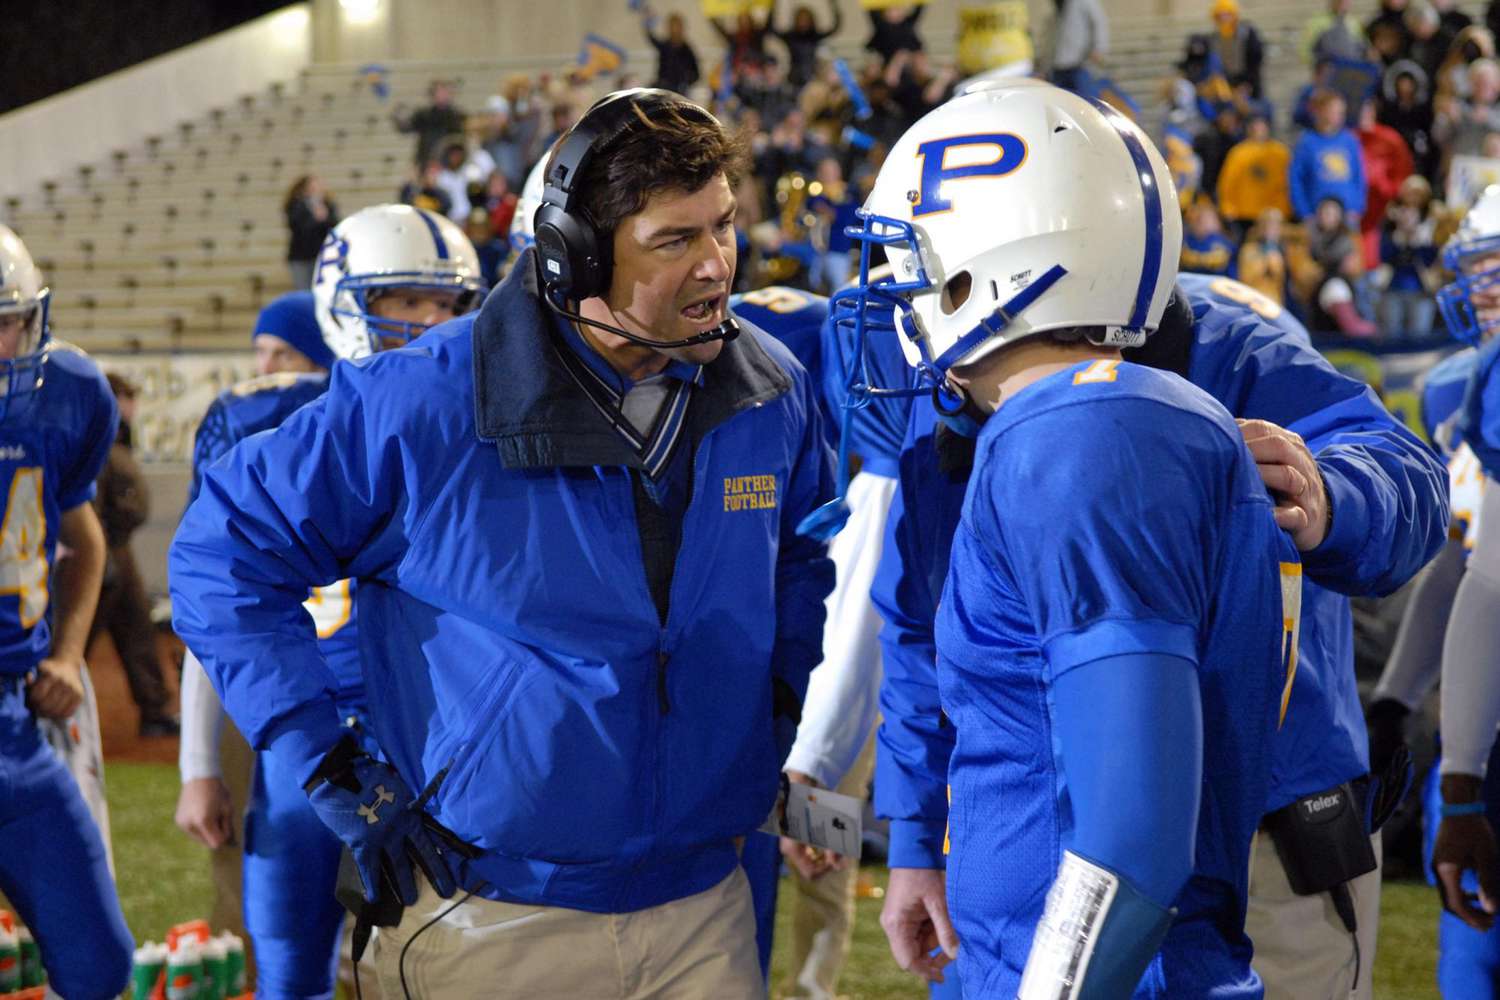 FRIDAY NIGHT LIGHTS, Kyle Chandler, Zach Gilford, 2006-2011,  ©NBC / Courtesy Everett Collections